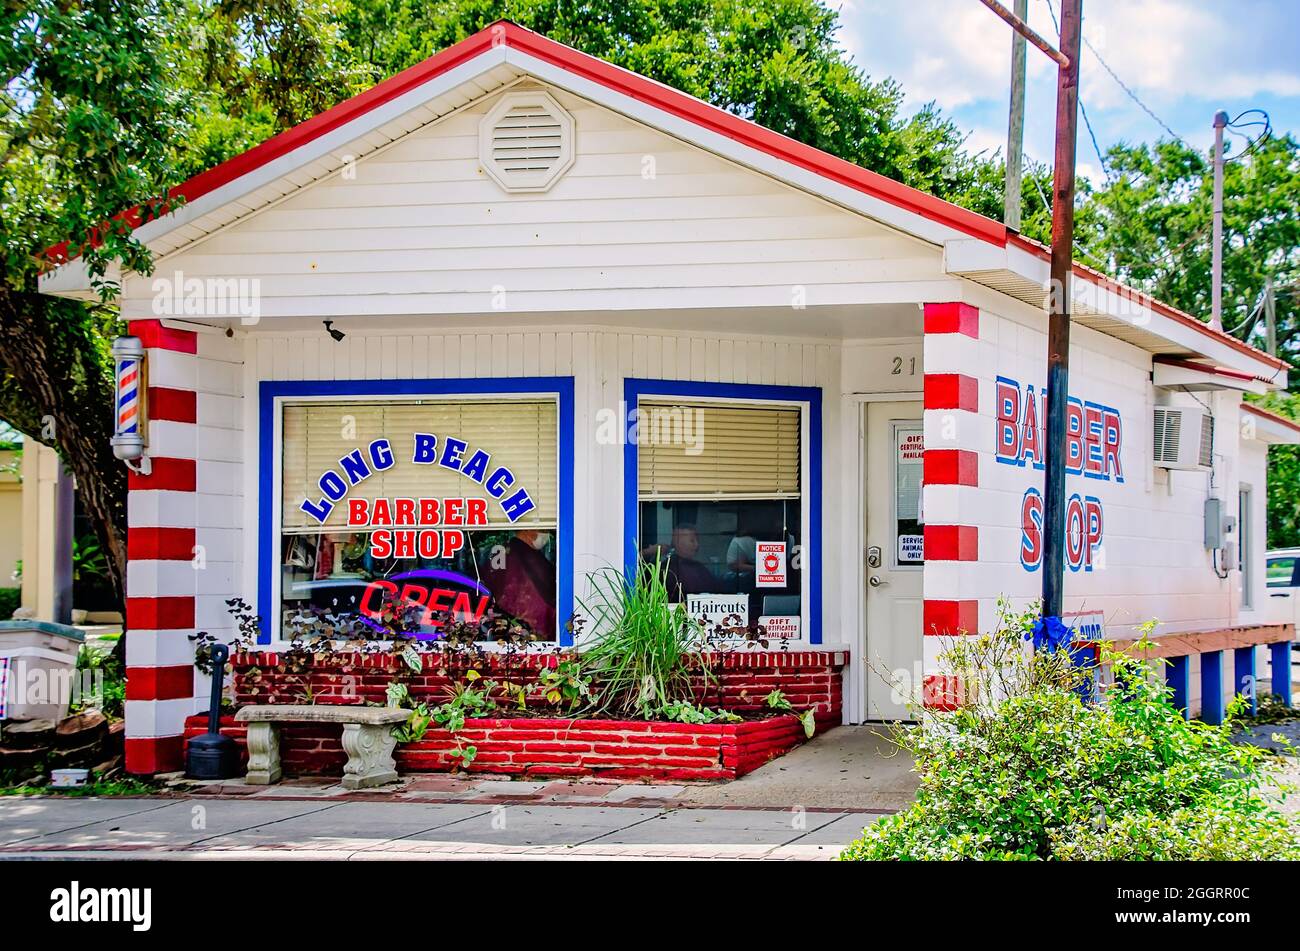 Long Beach Barber Shop is pictured, Aug. 31, 2021, in Long Beach, Mississippi. The barbershop opened in 1959. Stock Photo